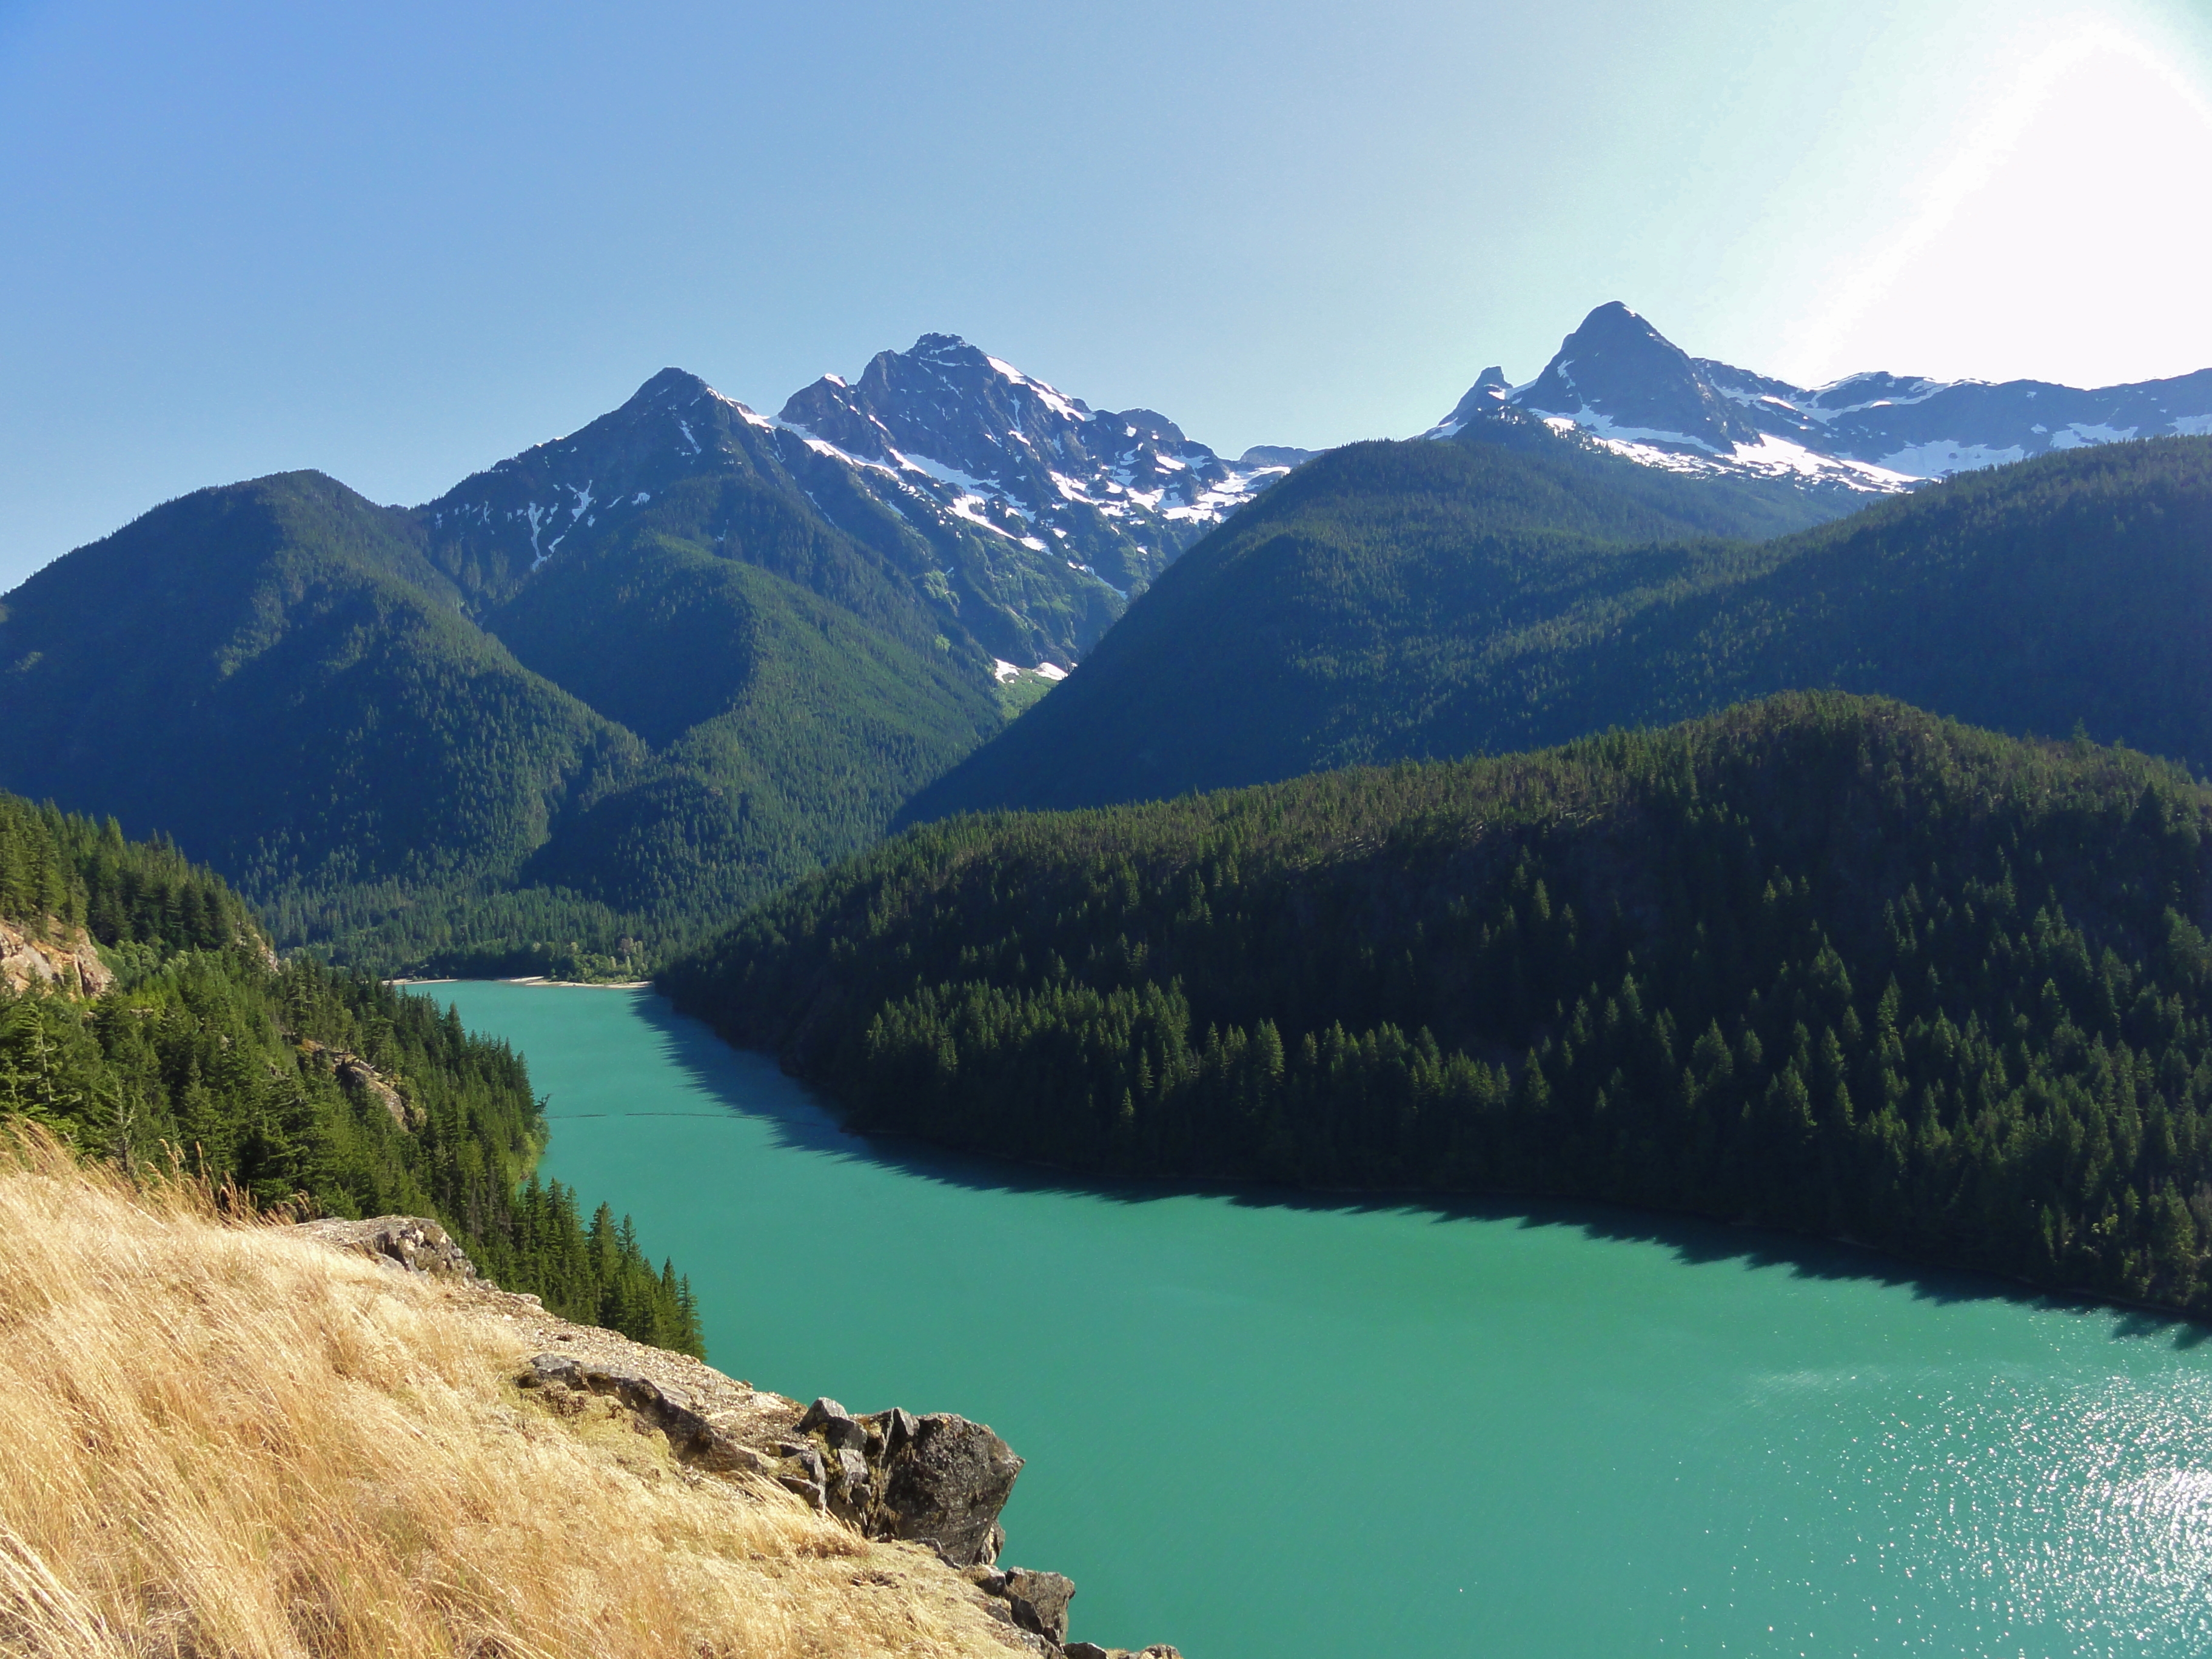 Colonial Peak and Pyramid Peak from Diablo Lake Overlook. The extraordinary blue of Diablo Lake is caused by glacial sediments carried down by creeks.